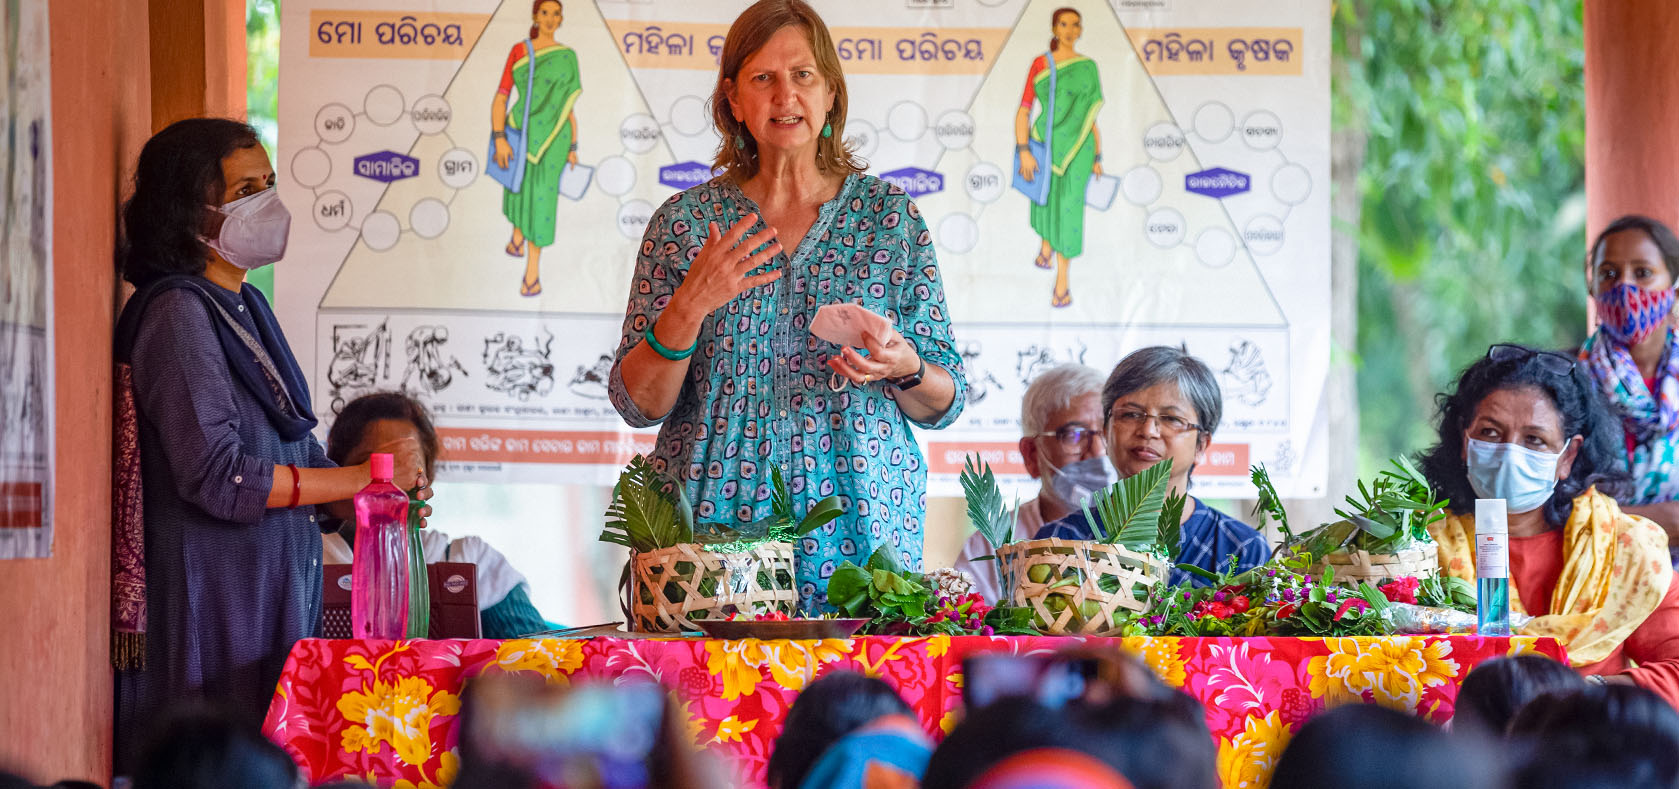 UN Women Representative in India, Susan Ferguson, meets local women and girls in Urbengi village, in the Dhenkanal district of Odisha. Accompanying her (seated to her right) were Madhu Khetan, Integrator and Programme Lead, Professional Assistance For Development Action (PRADAN) and Kanta Singh, UN Women Programme Manager. Photo: UN Women/Prashanth Vishwanathan